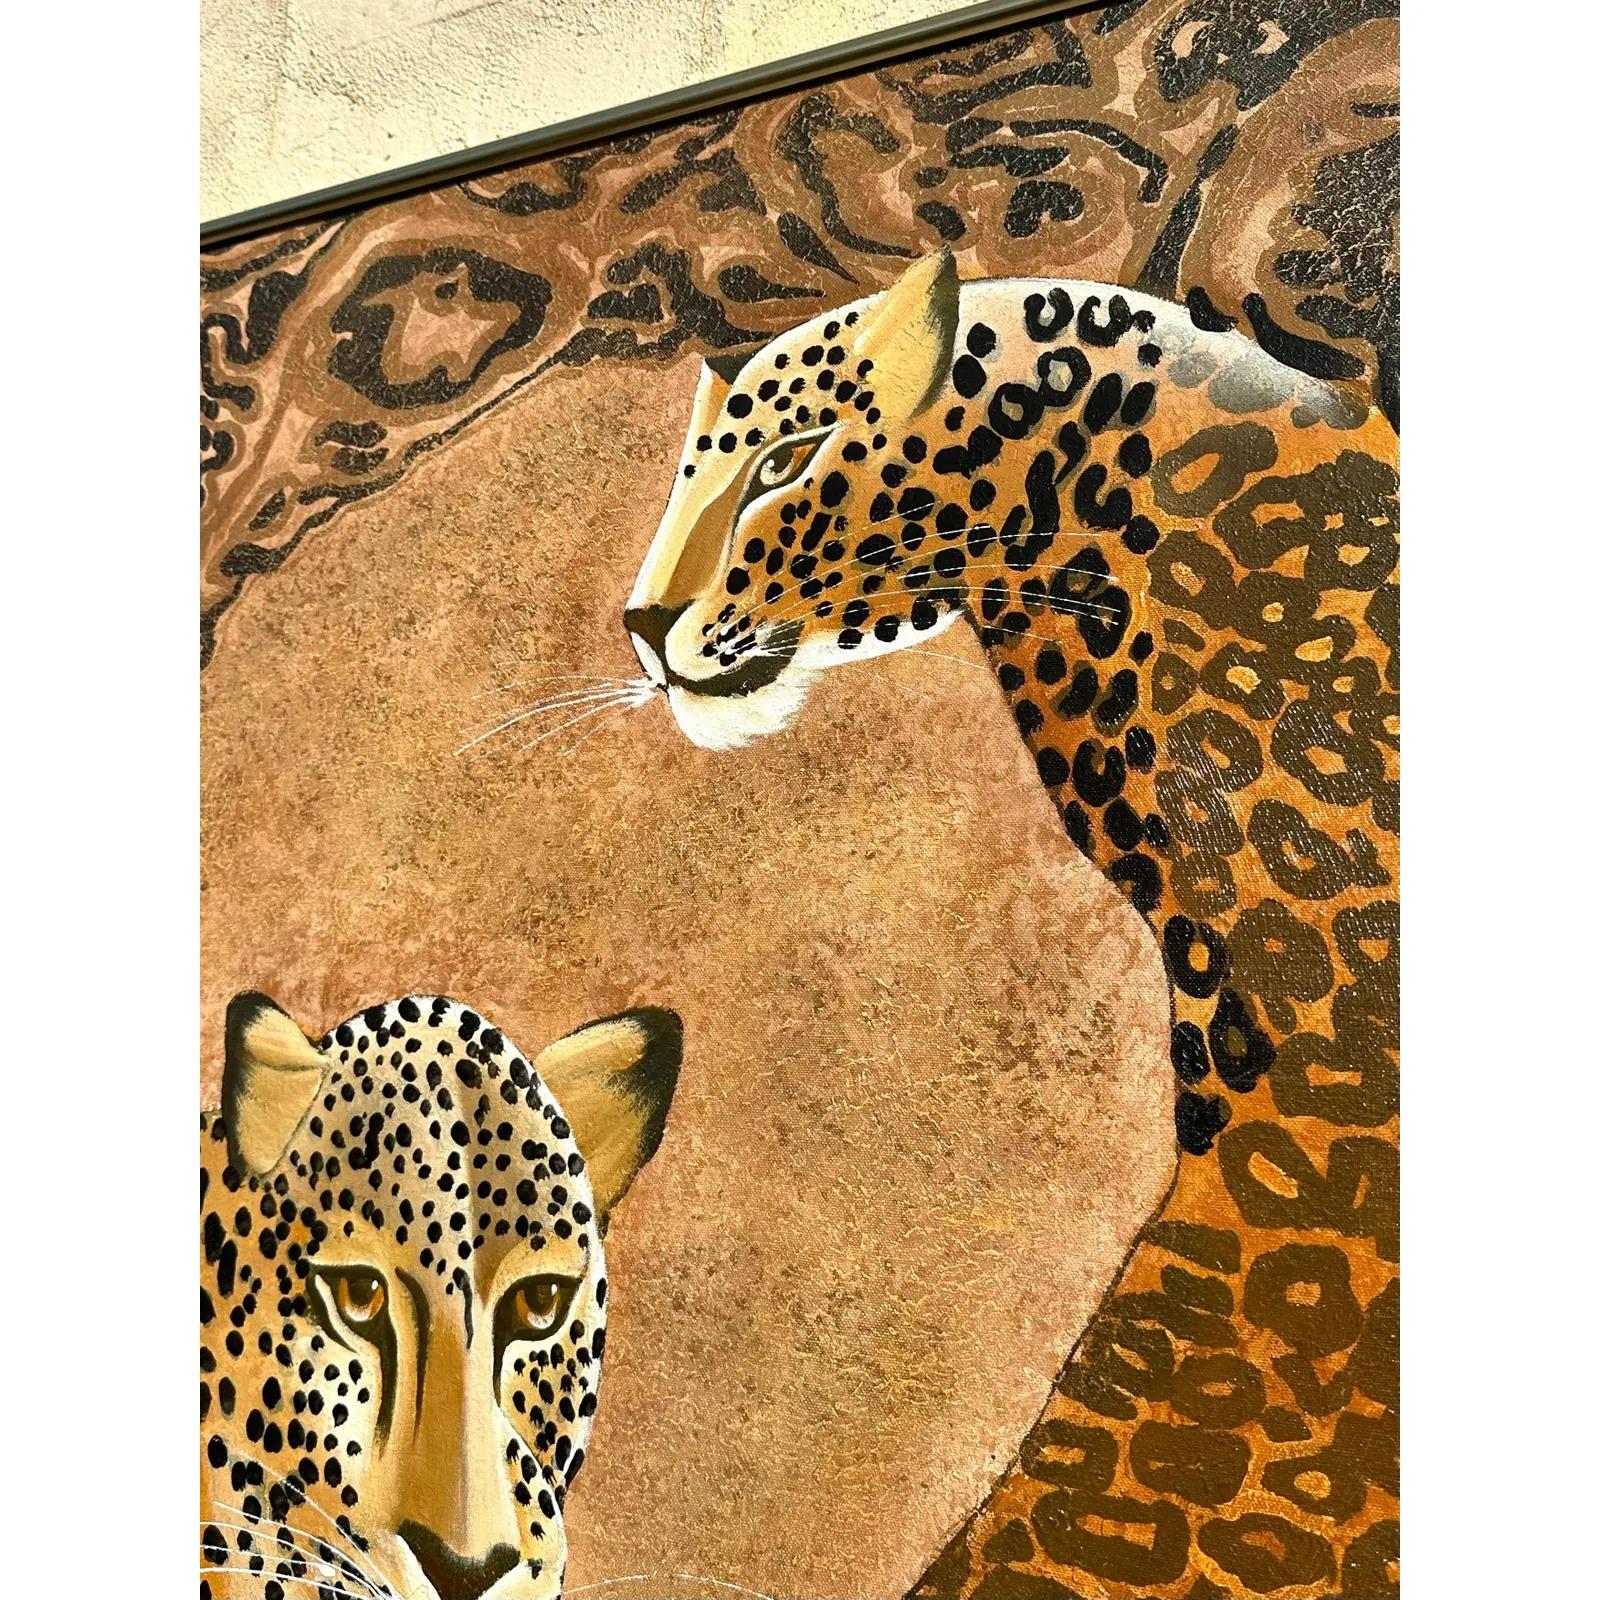 A fabulous vintage Boho original oil painting. A handsome pair of cheetahs in repose. Signed by the artist. Acquired from a Palm Beach estate.

The painting is in good vintage condition. Minor scuffs and blemishes appropriate to it’s age and use.